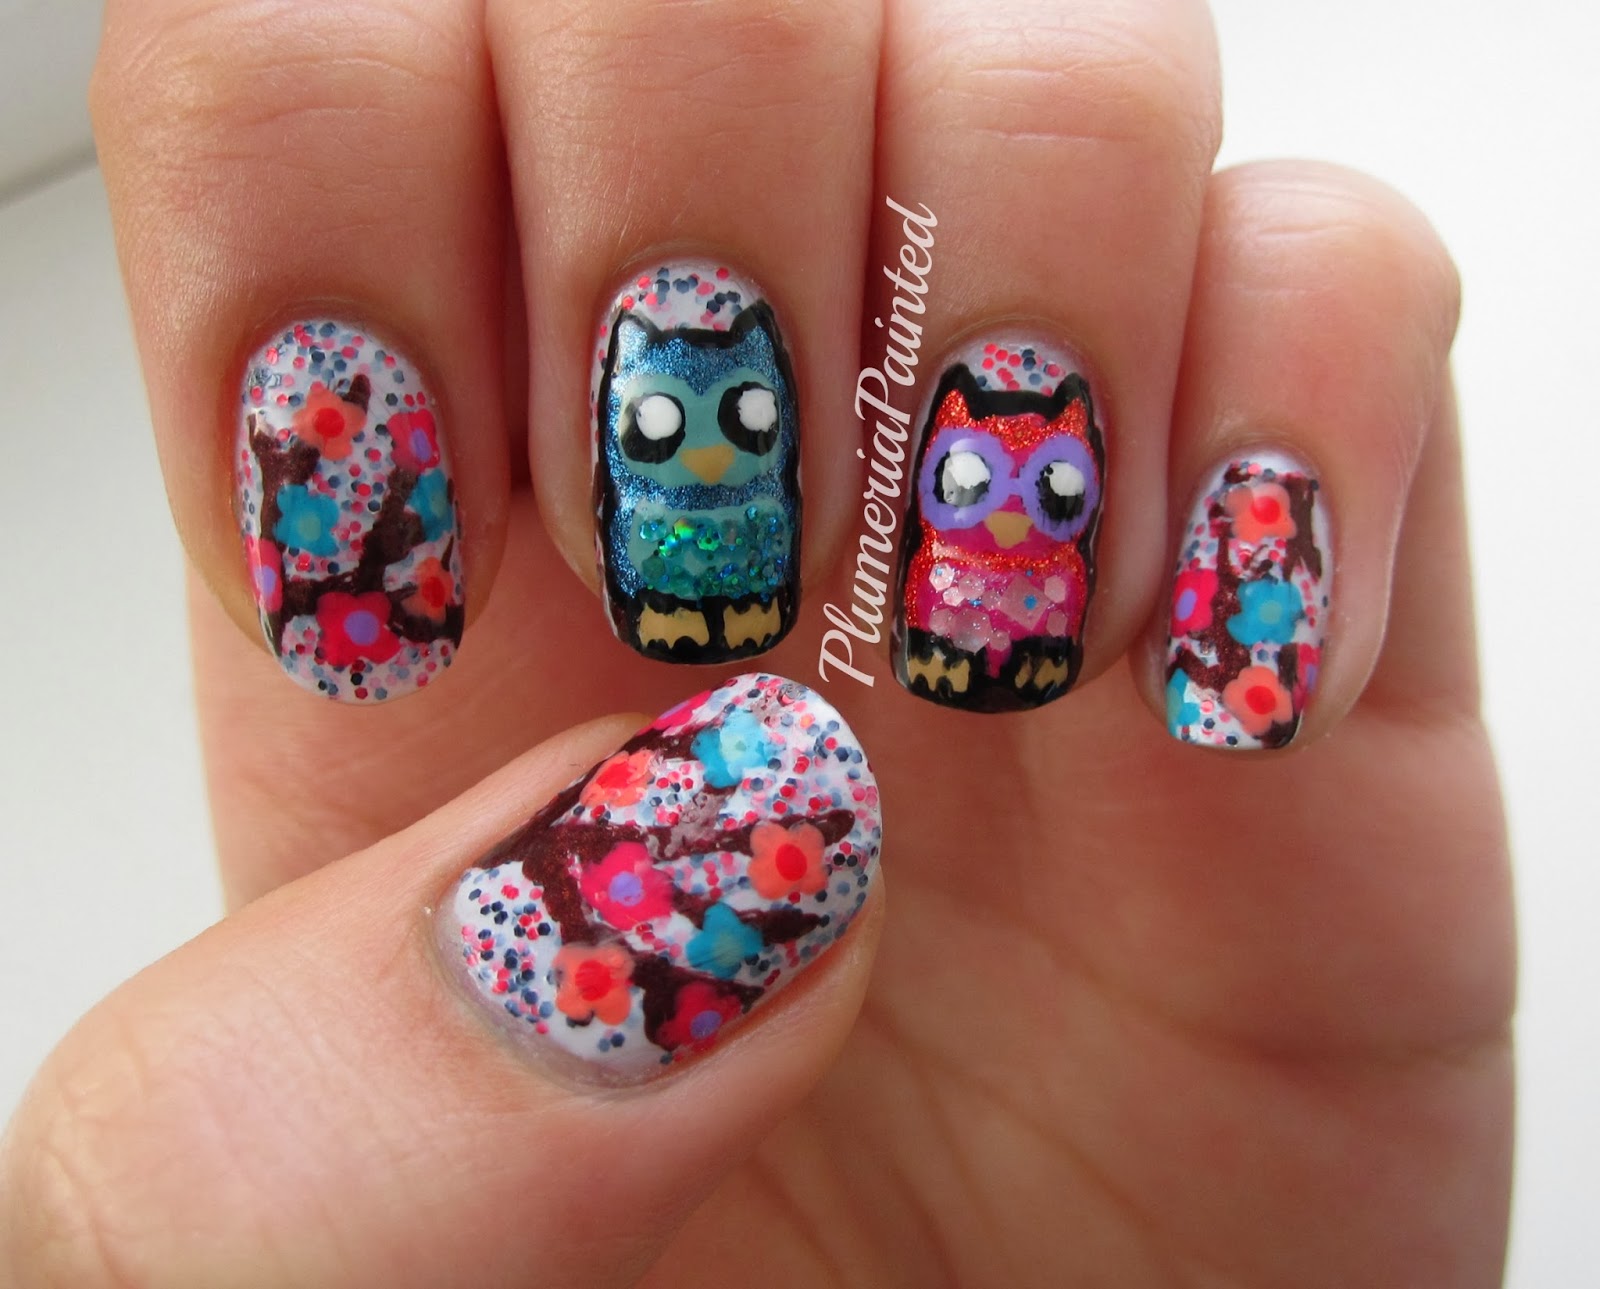 1. Cute Owl Nail Art Decals - wide 8